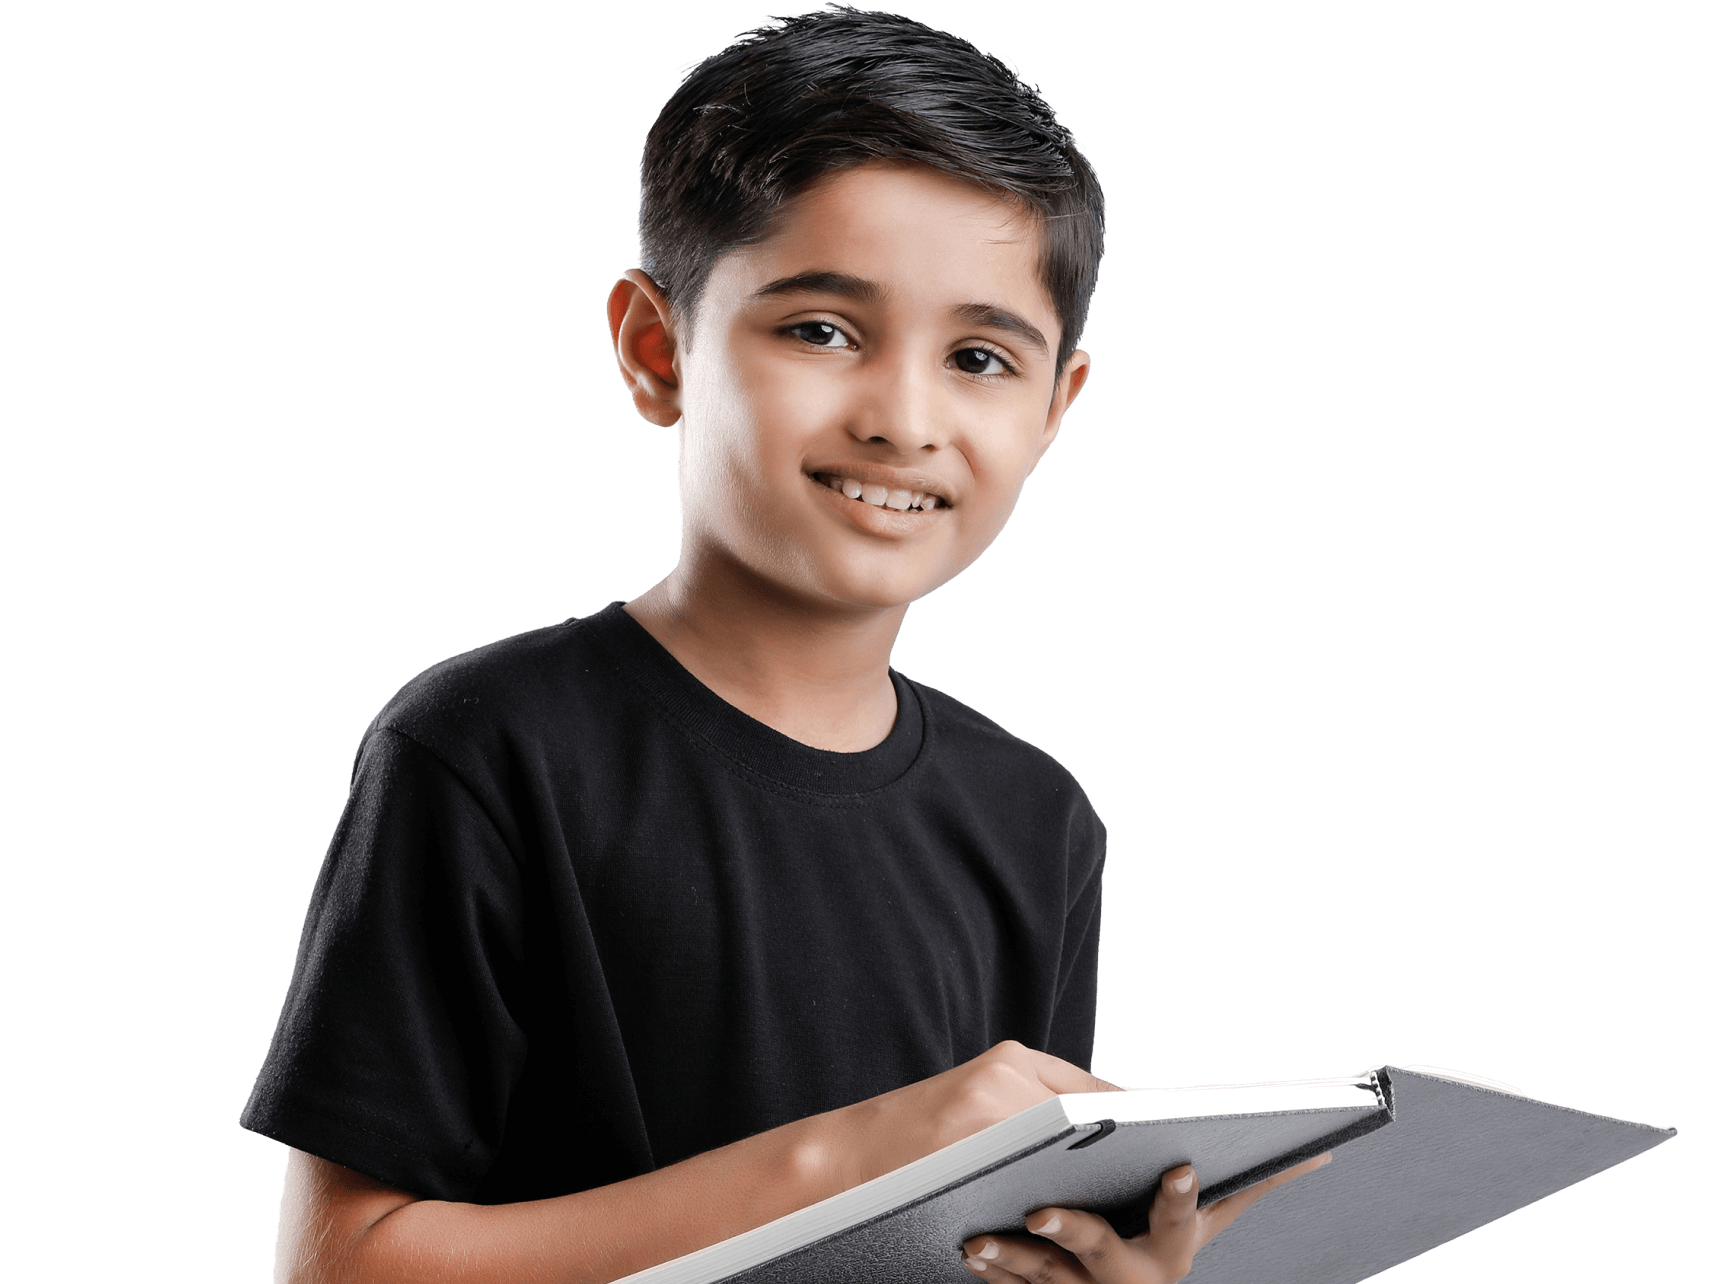 A smiling boy in a black shirt holding an open book.